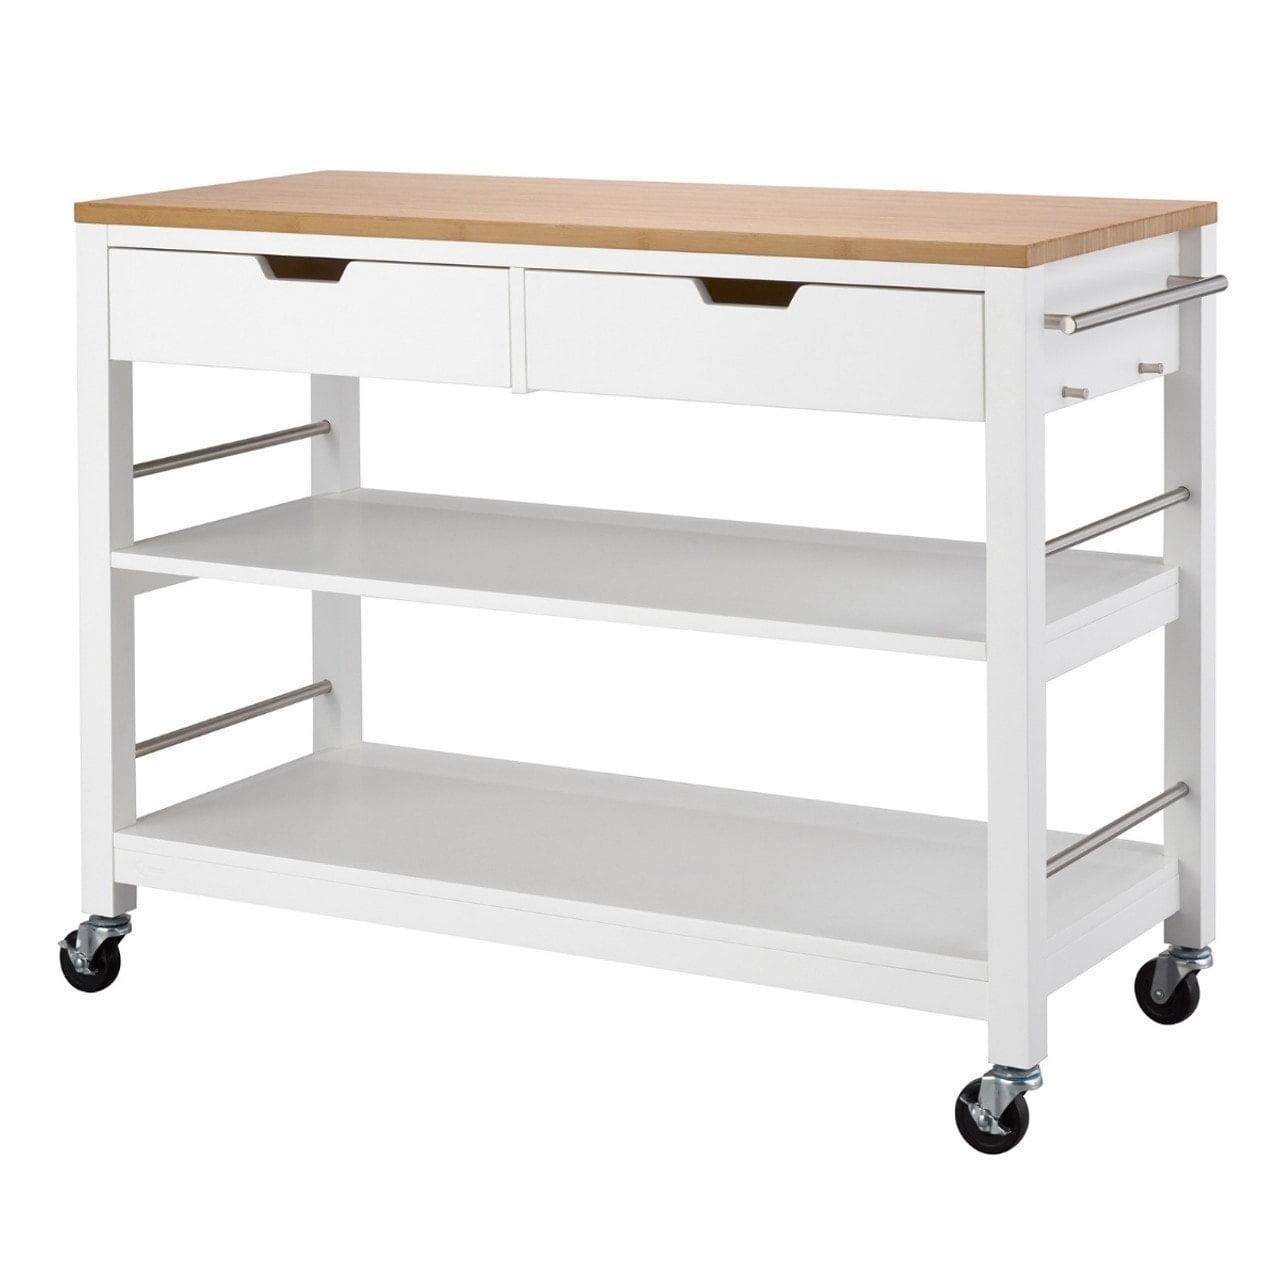 Sleek 48" White Rubberwood Kitchen Island with Stainless Steel Accents